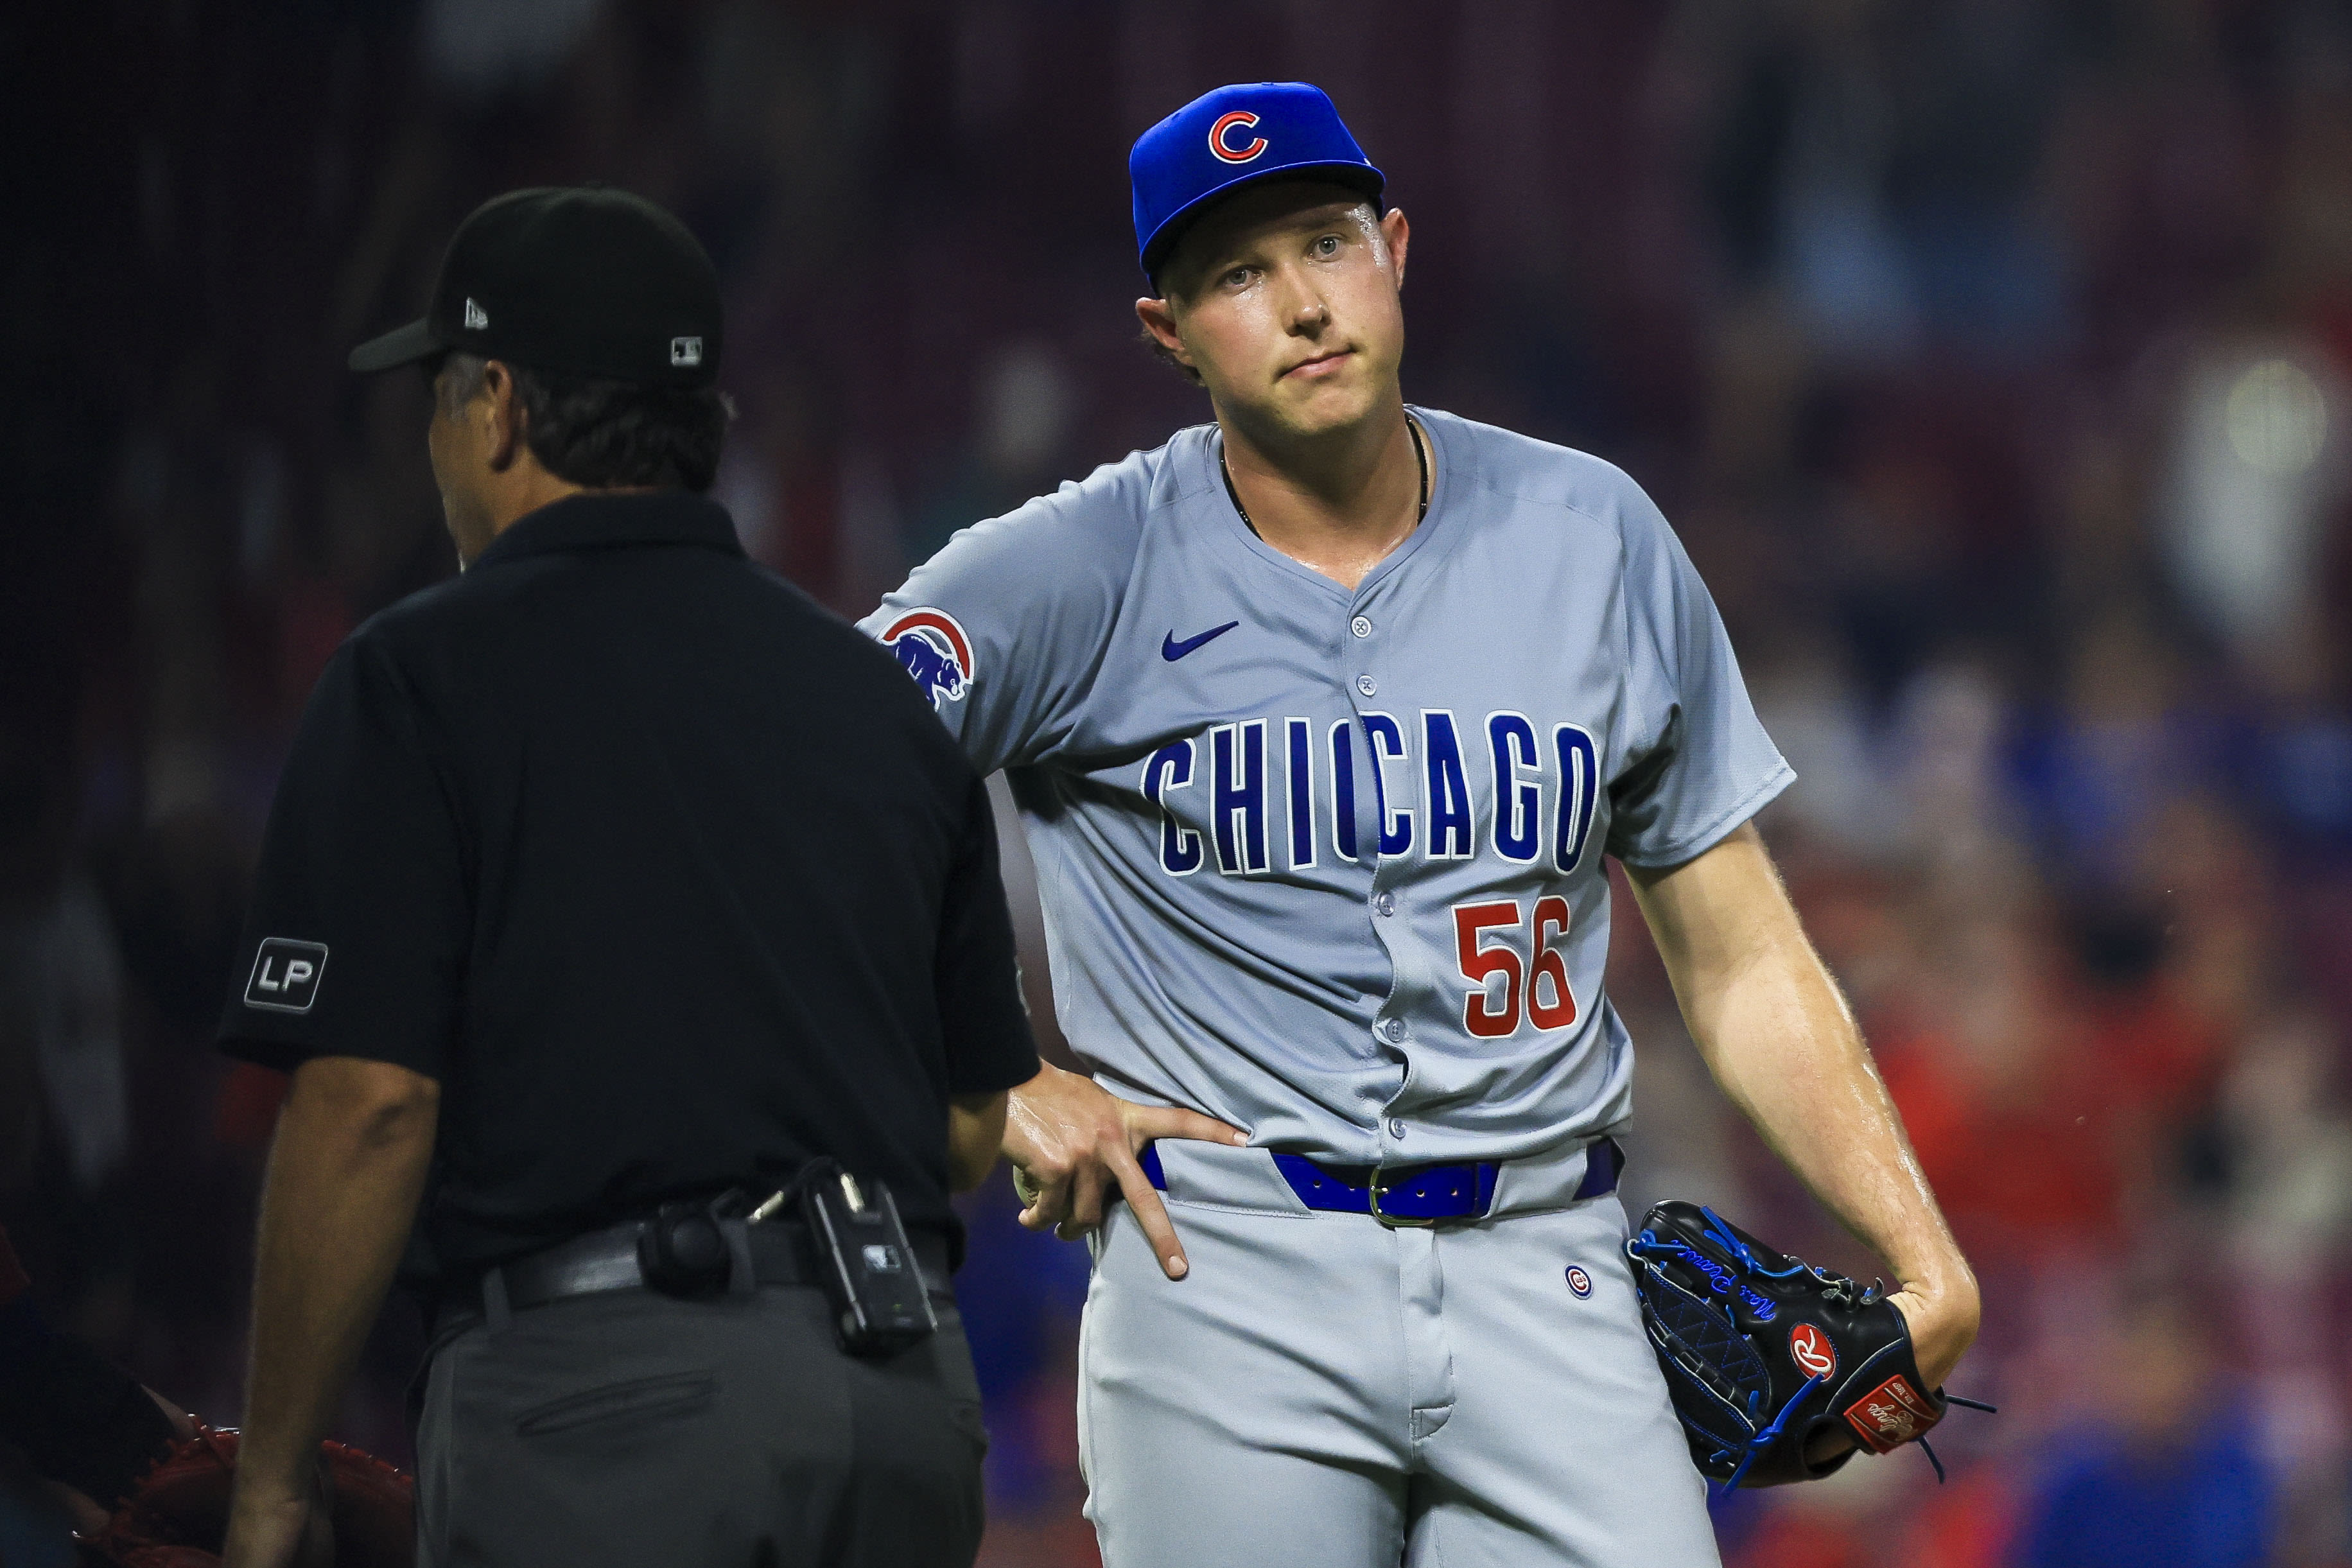 Cubs' Nate Pearson ejected for pitch to batter's head as Reds win 7-1